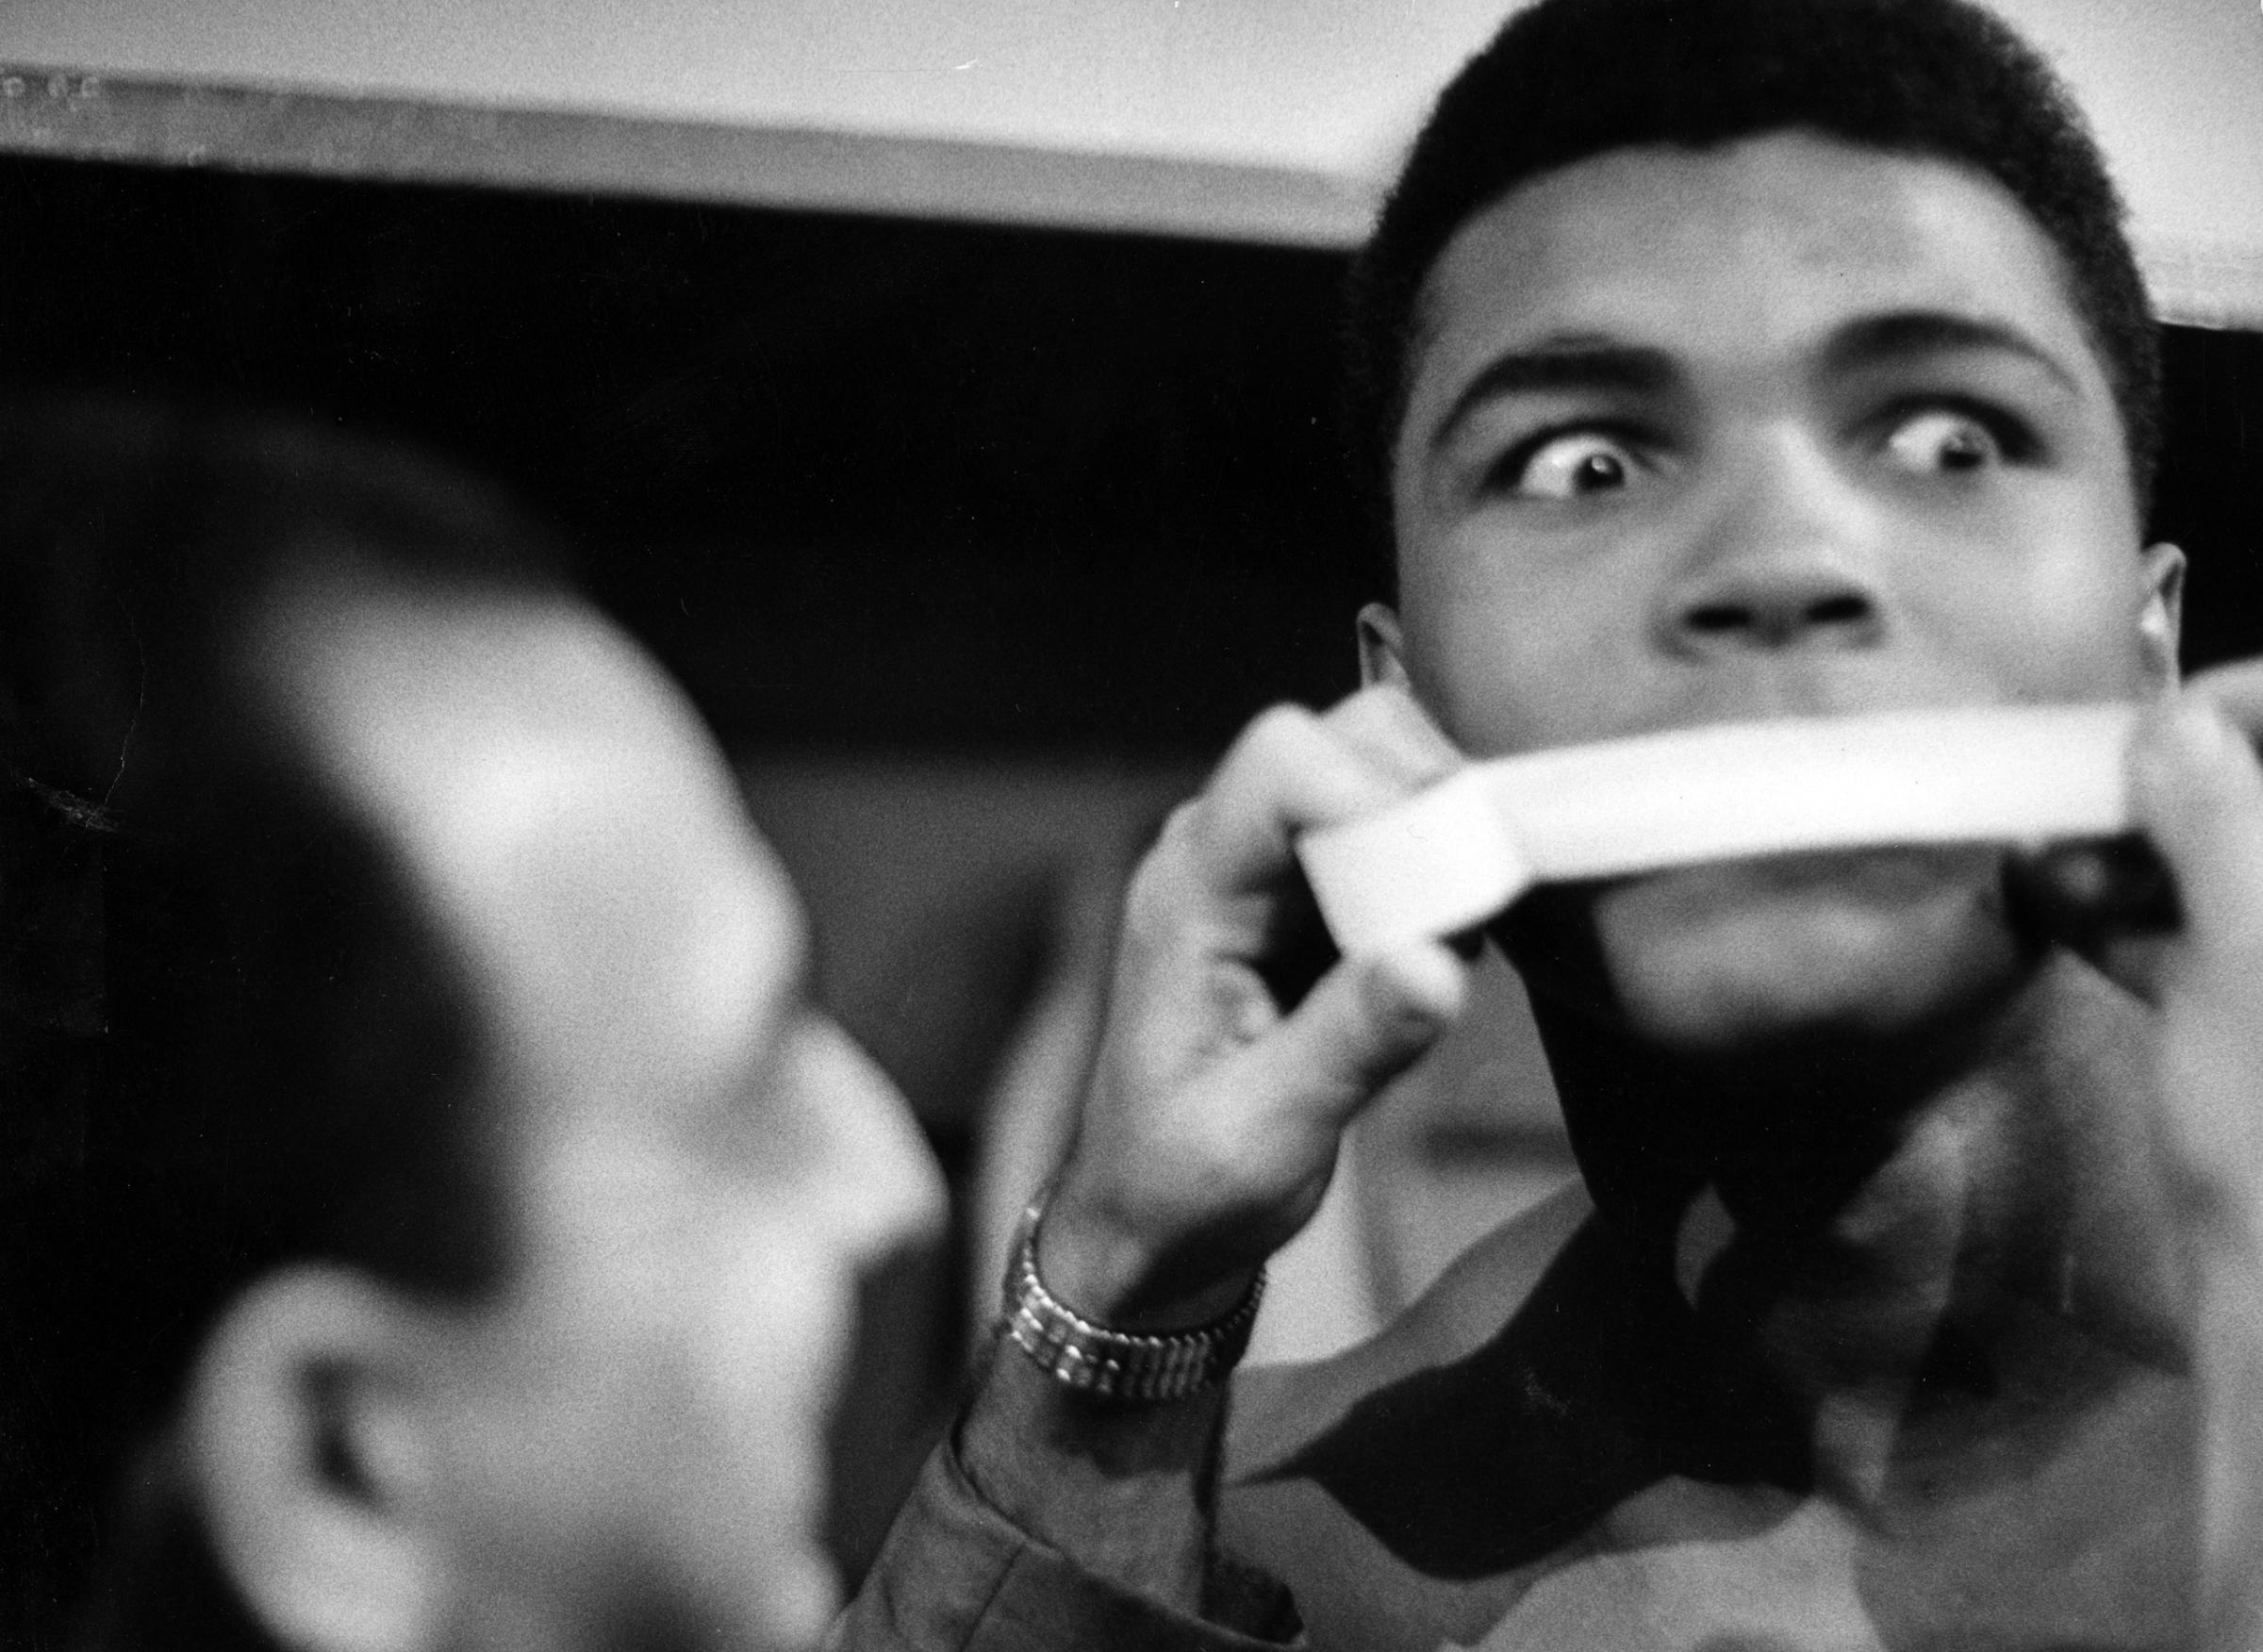 Heavyweight contender Cassius Clay (later aka Muhammad Ali), getting his poetic mouth taped by trainer Angelo Dundee during his weigh-in before big fight with Doug Jones, 1963.